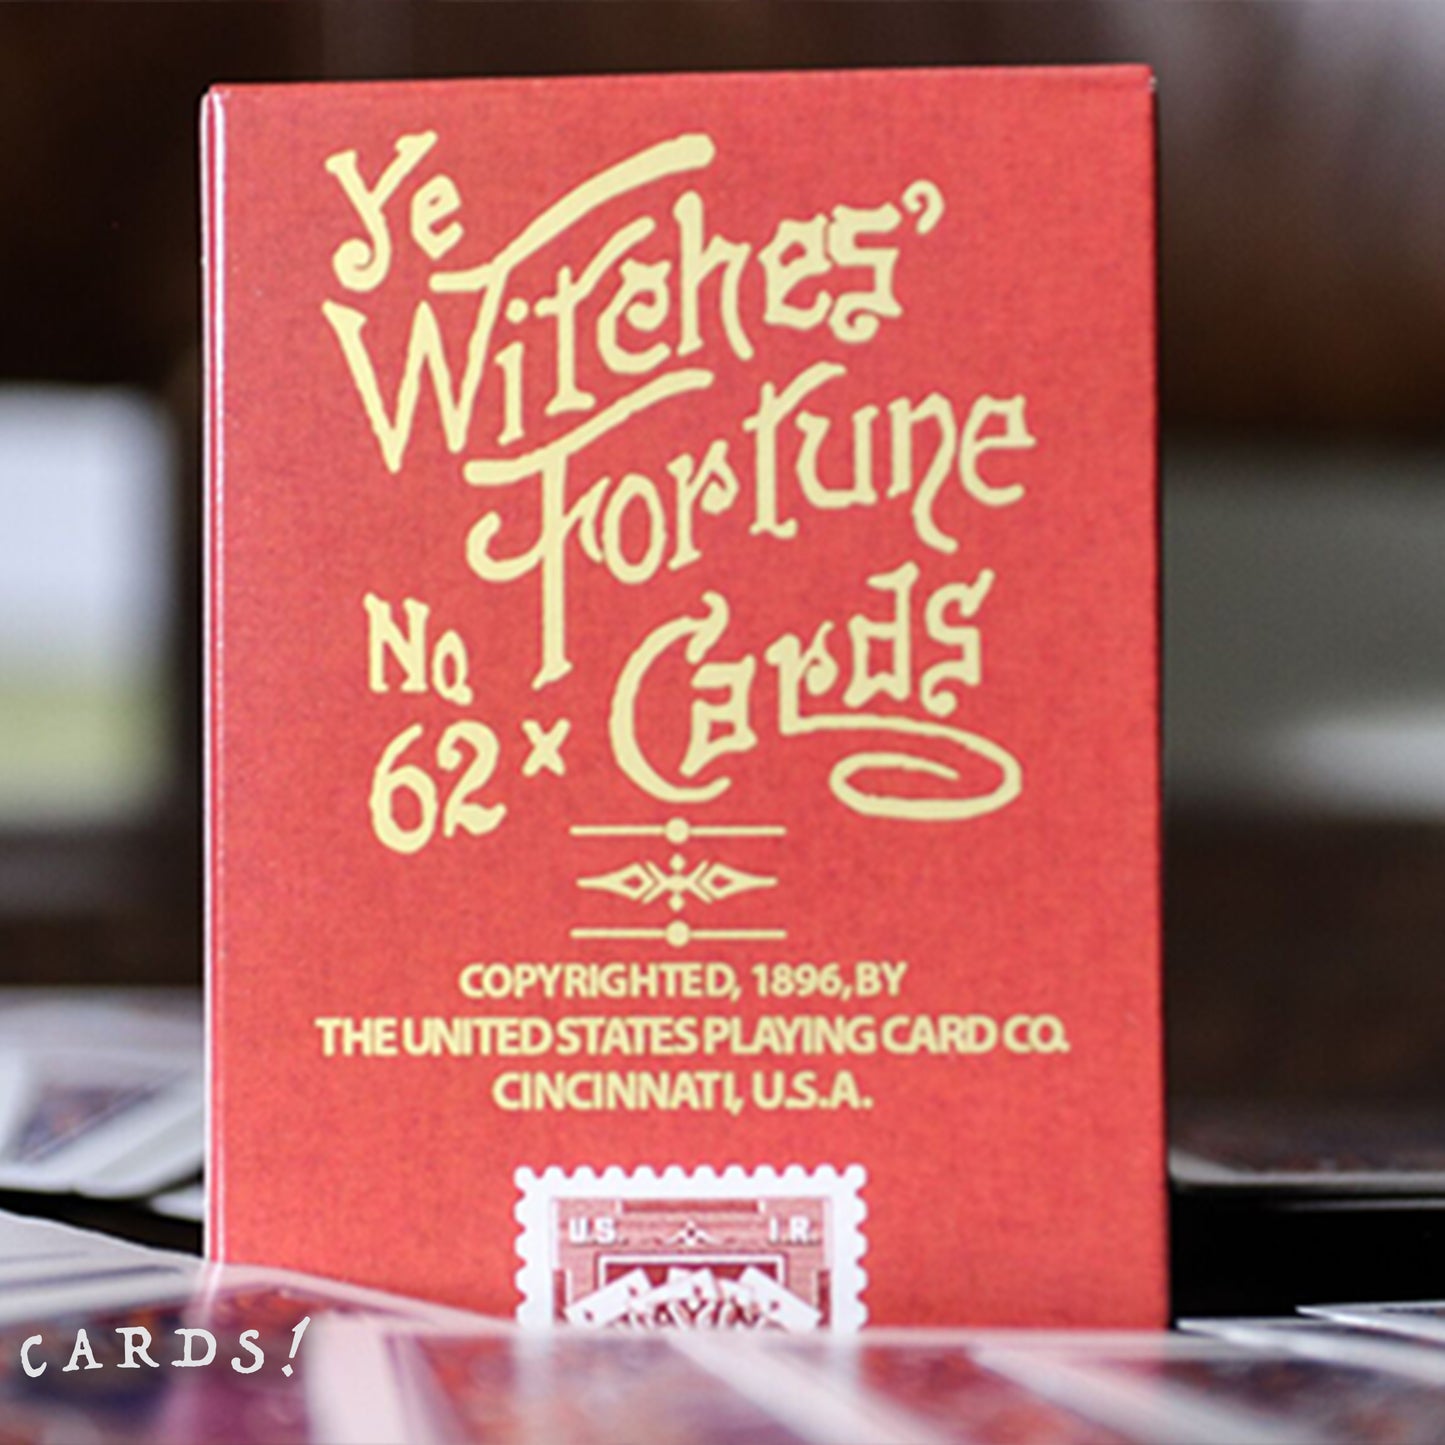 Ye Witches' Fortune Cards No 62 紅色 啤牌 撲克牌 - The Lanes HK